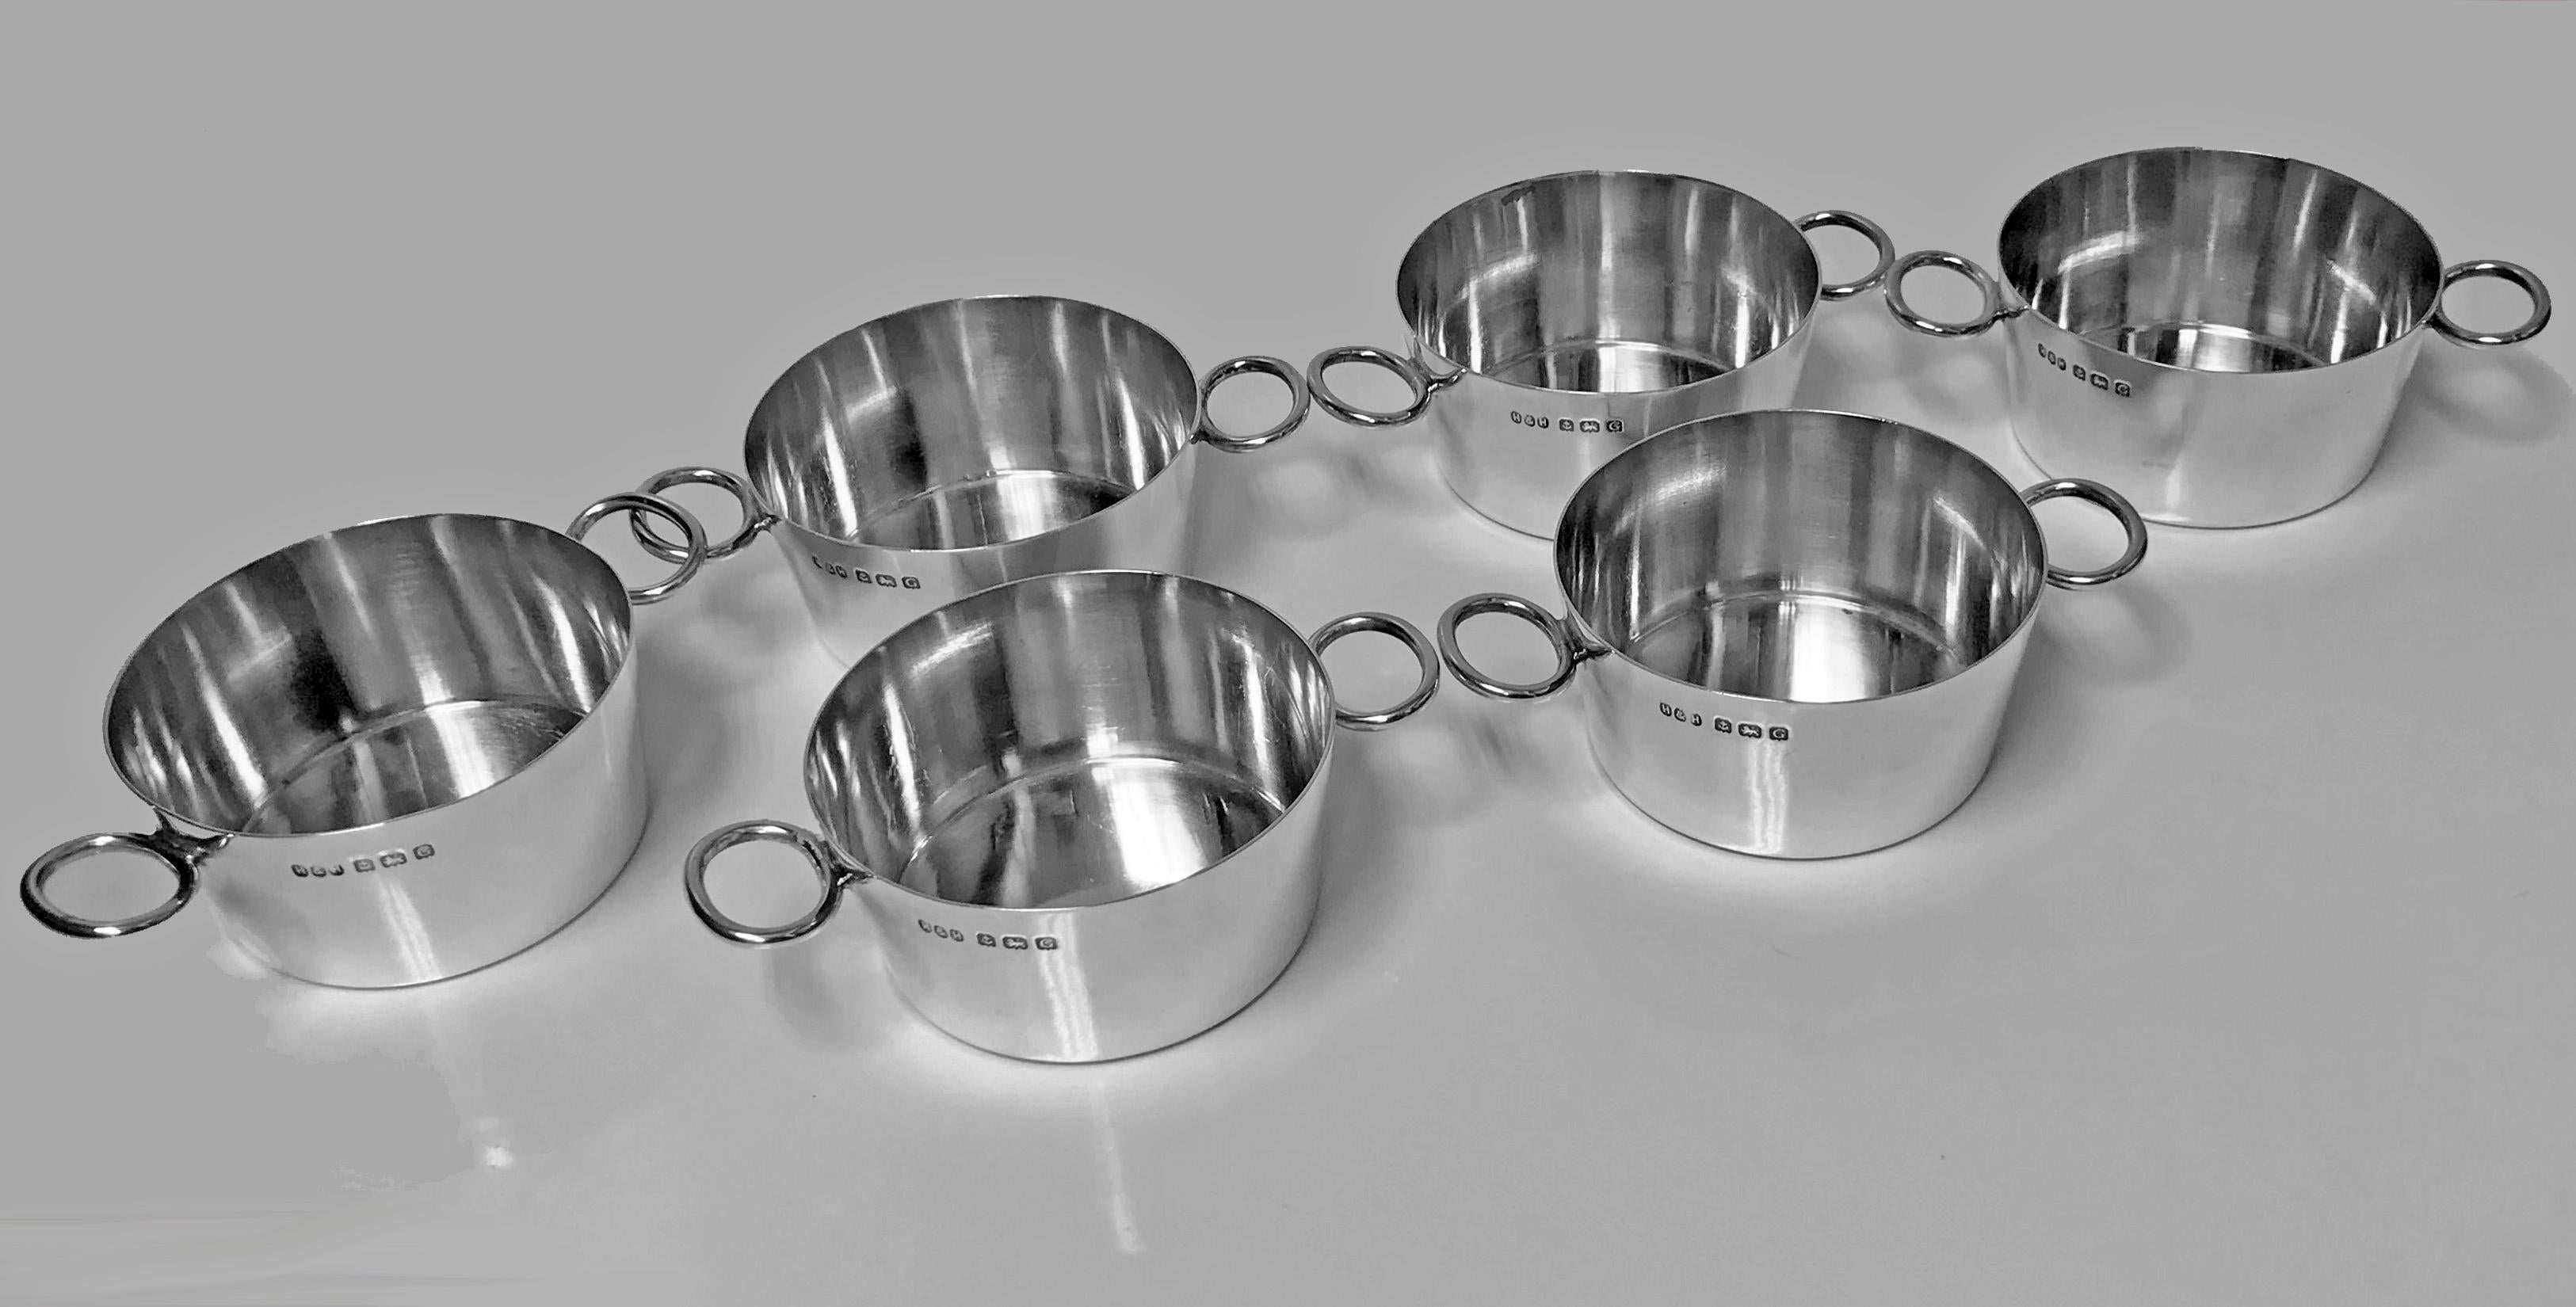 Rare set of Art Deco Hukin and Heath solid sterling silver Ramekin dishes, Birmingham 1931 Hukin and Heath. Each of simple very slightly tapered form with open oval side handles. Each fully hallmarked. Measures: Height 1.50 inches, diameter 3.0